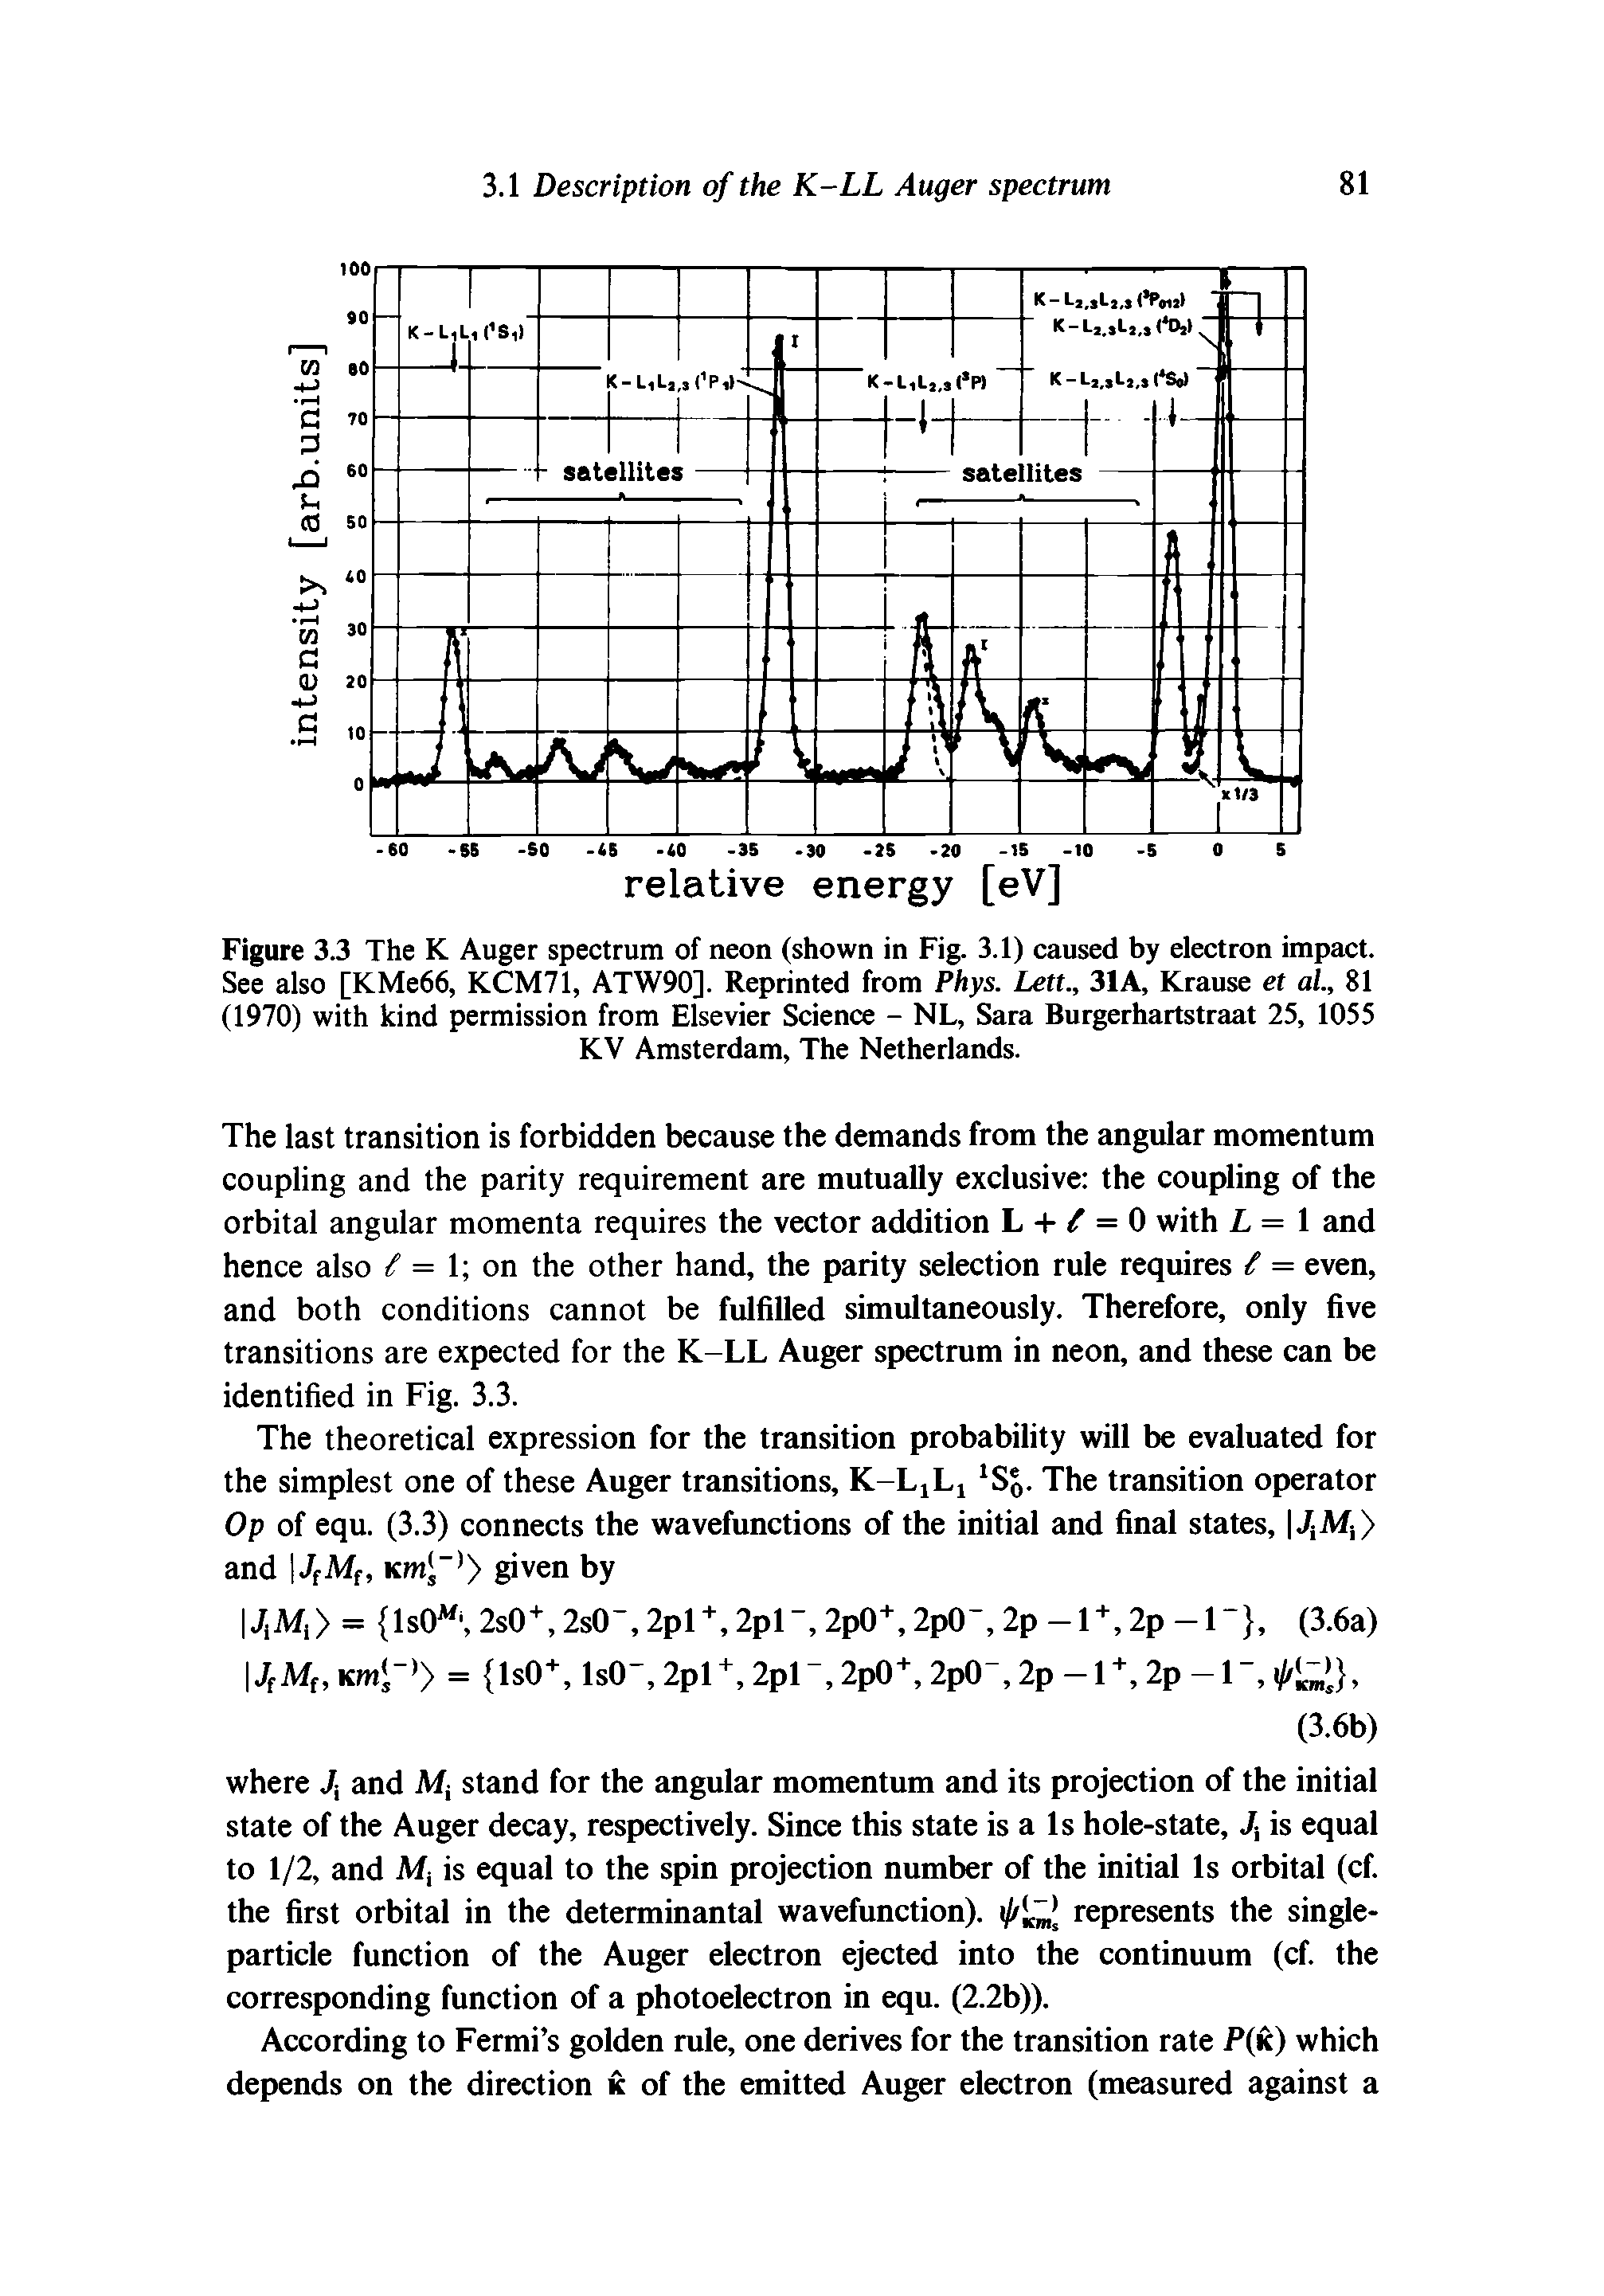 Figure 3.3 The K Auger spectrum of neon (shown in Fig. 3.1) caused by electron impact. See also [KMe66, KCM71, ATW90]. Reprinted from Phys. Lett., 31A, Krause et al., 81 (1970) with kind permission from Elsevier Science - NL, Sara Burgerhartstraat 25, 1055 KV Amsterdam, The Netherlands.